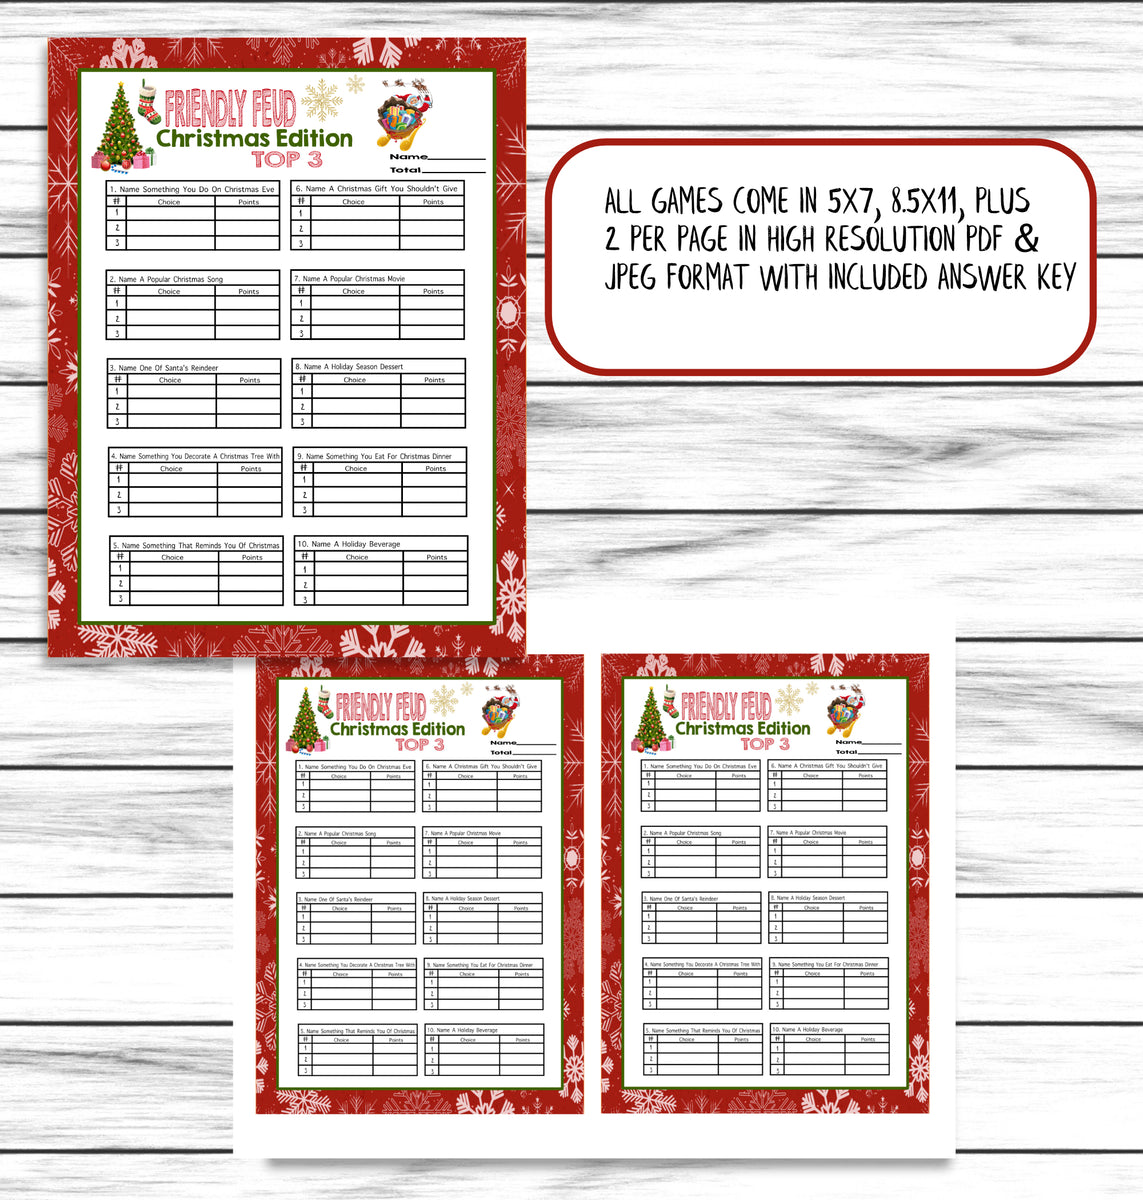 Family Feud for a Group Questions.pdf - Google Drive  Family feud game,  Family feud, Fun christmas party games